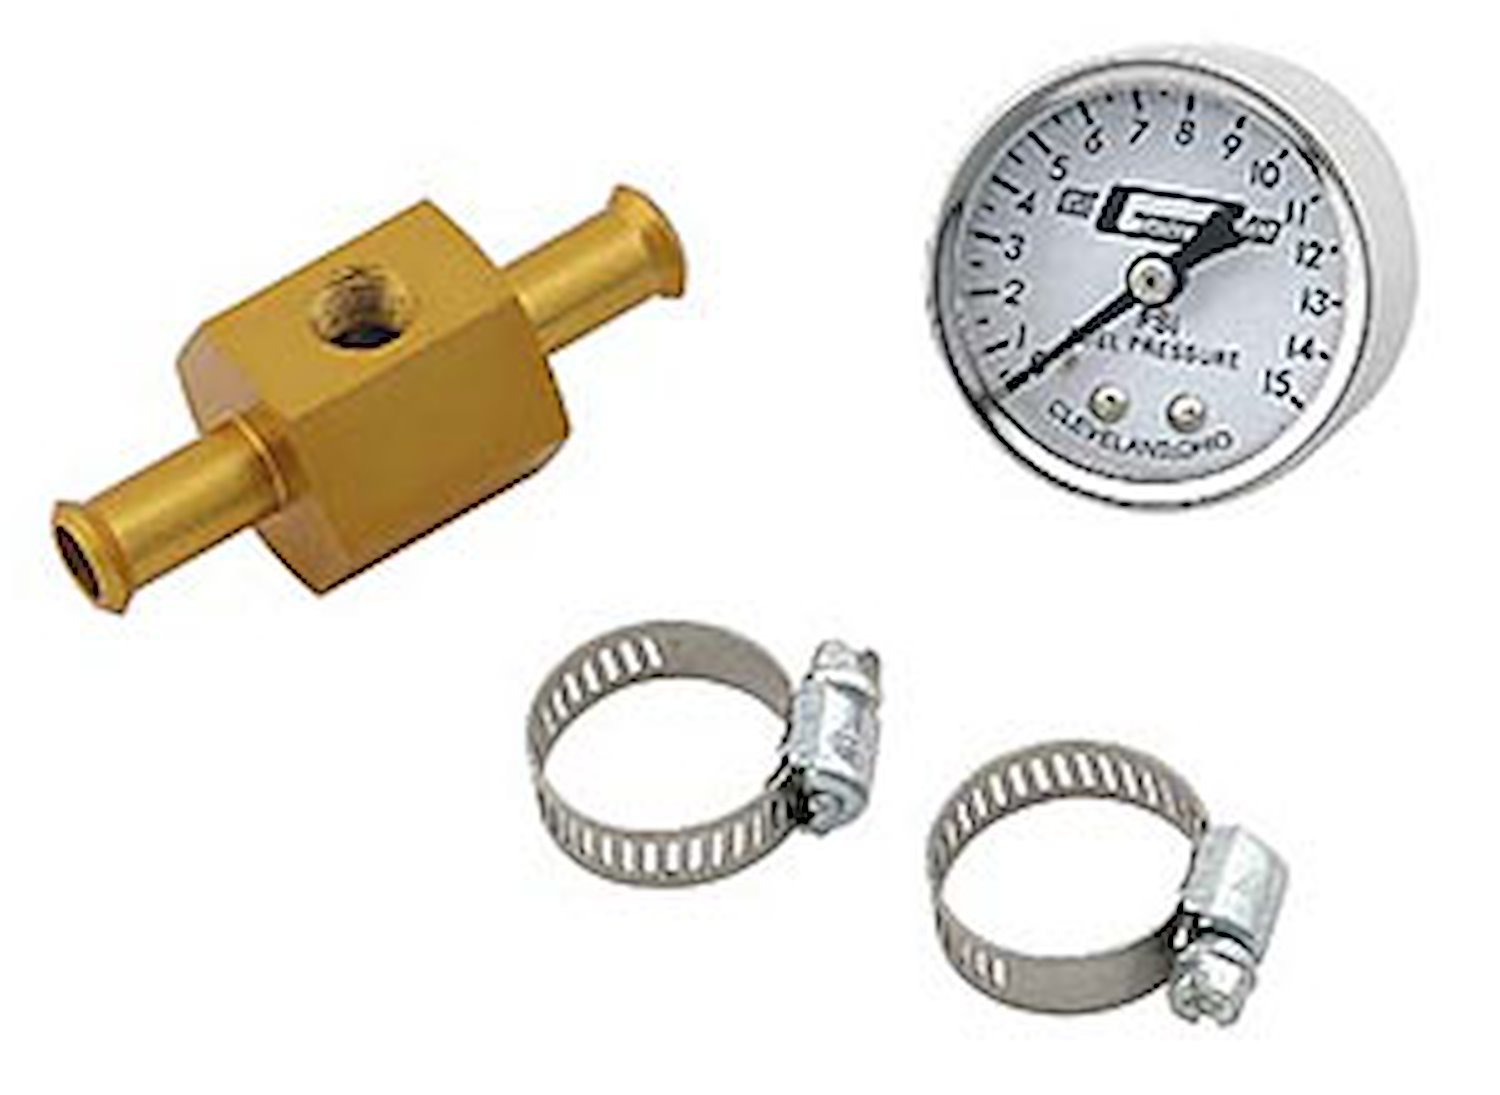 Fuel Pressure Gauge W/ In-Line Adapters 3/8" Inlet & Outlet